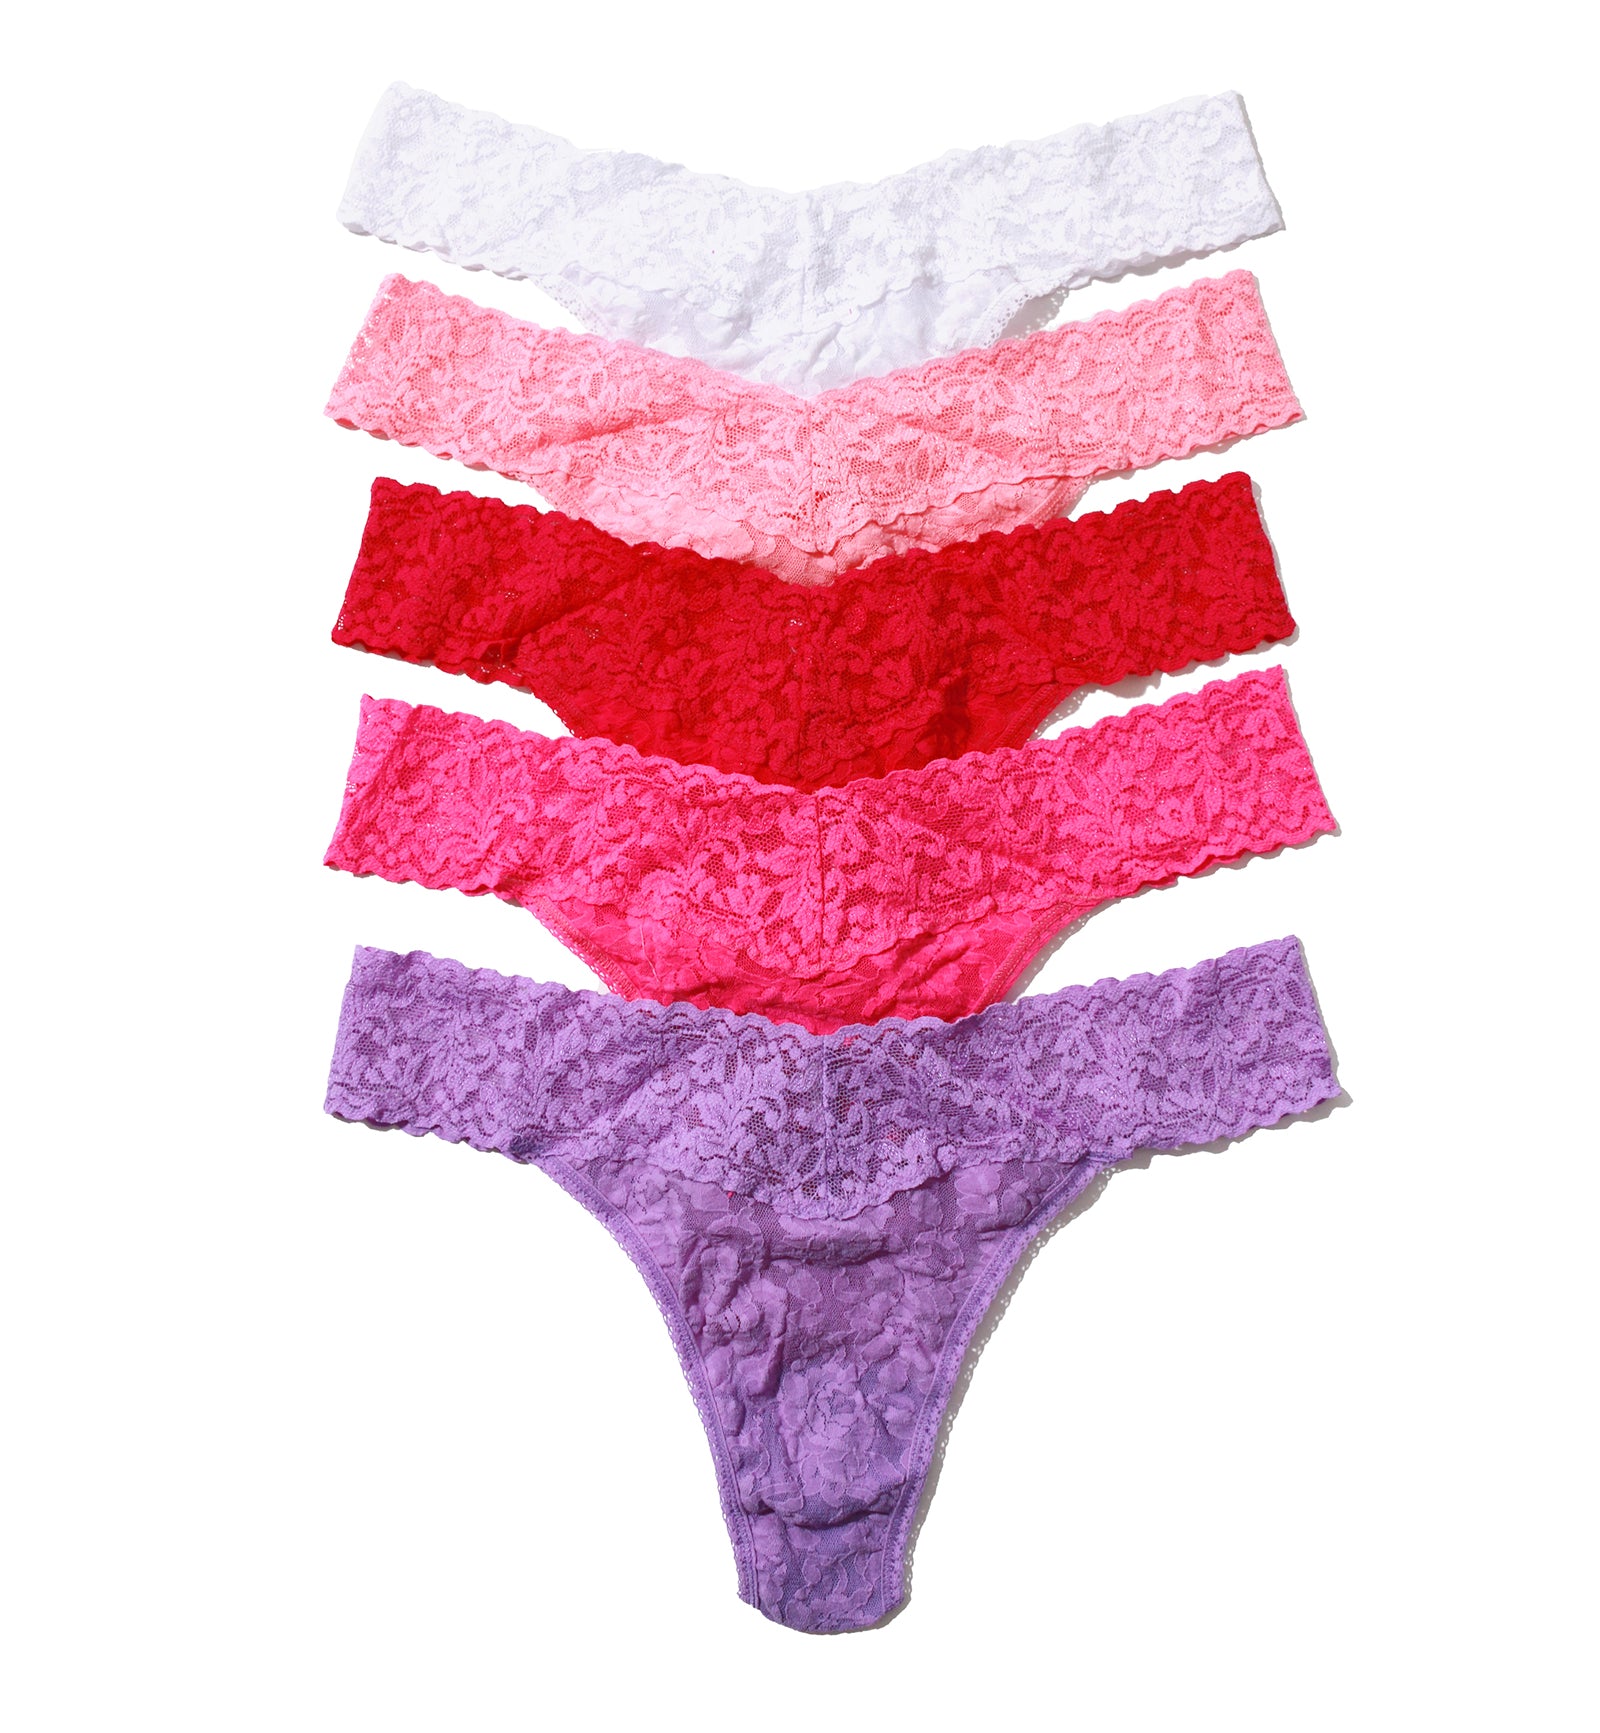 Hanky Panky 5-PACK Signature Lace Original Rise Thong (48115PK),Holiday23 FPRV - FPRV,One Size